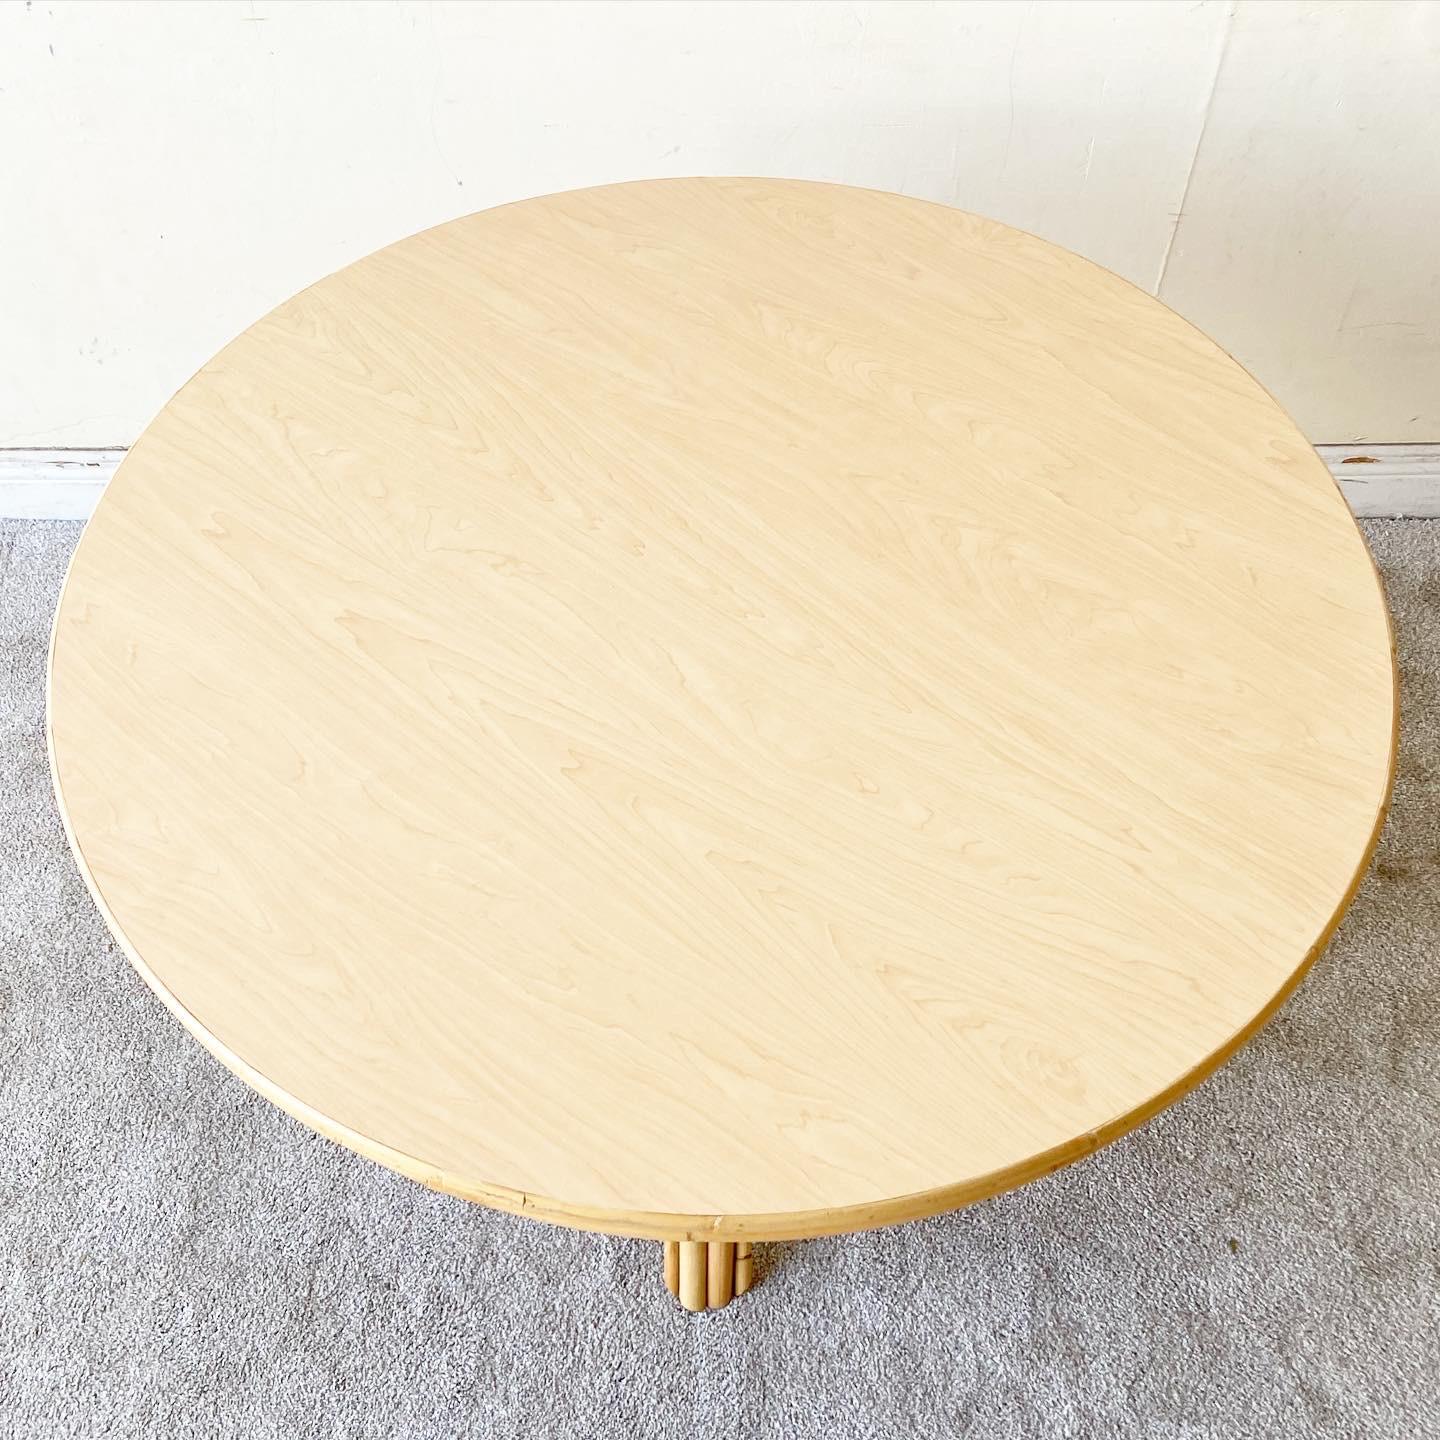 Exceptional vintage boho chic circular dining table. Features a bamboo rattan base and a laminate circular top.
 